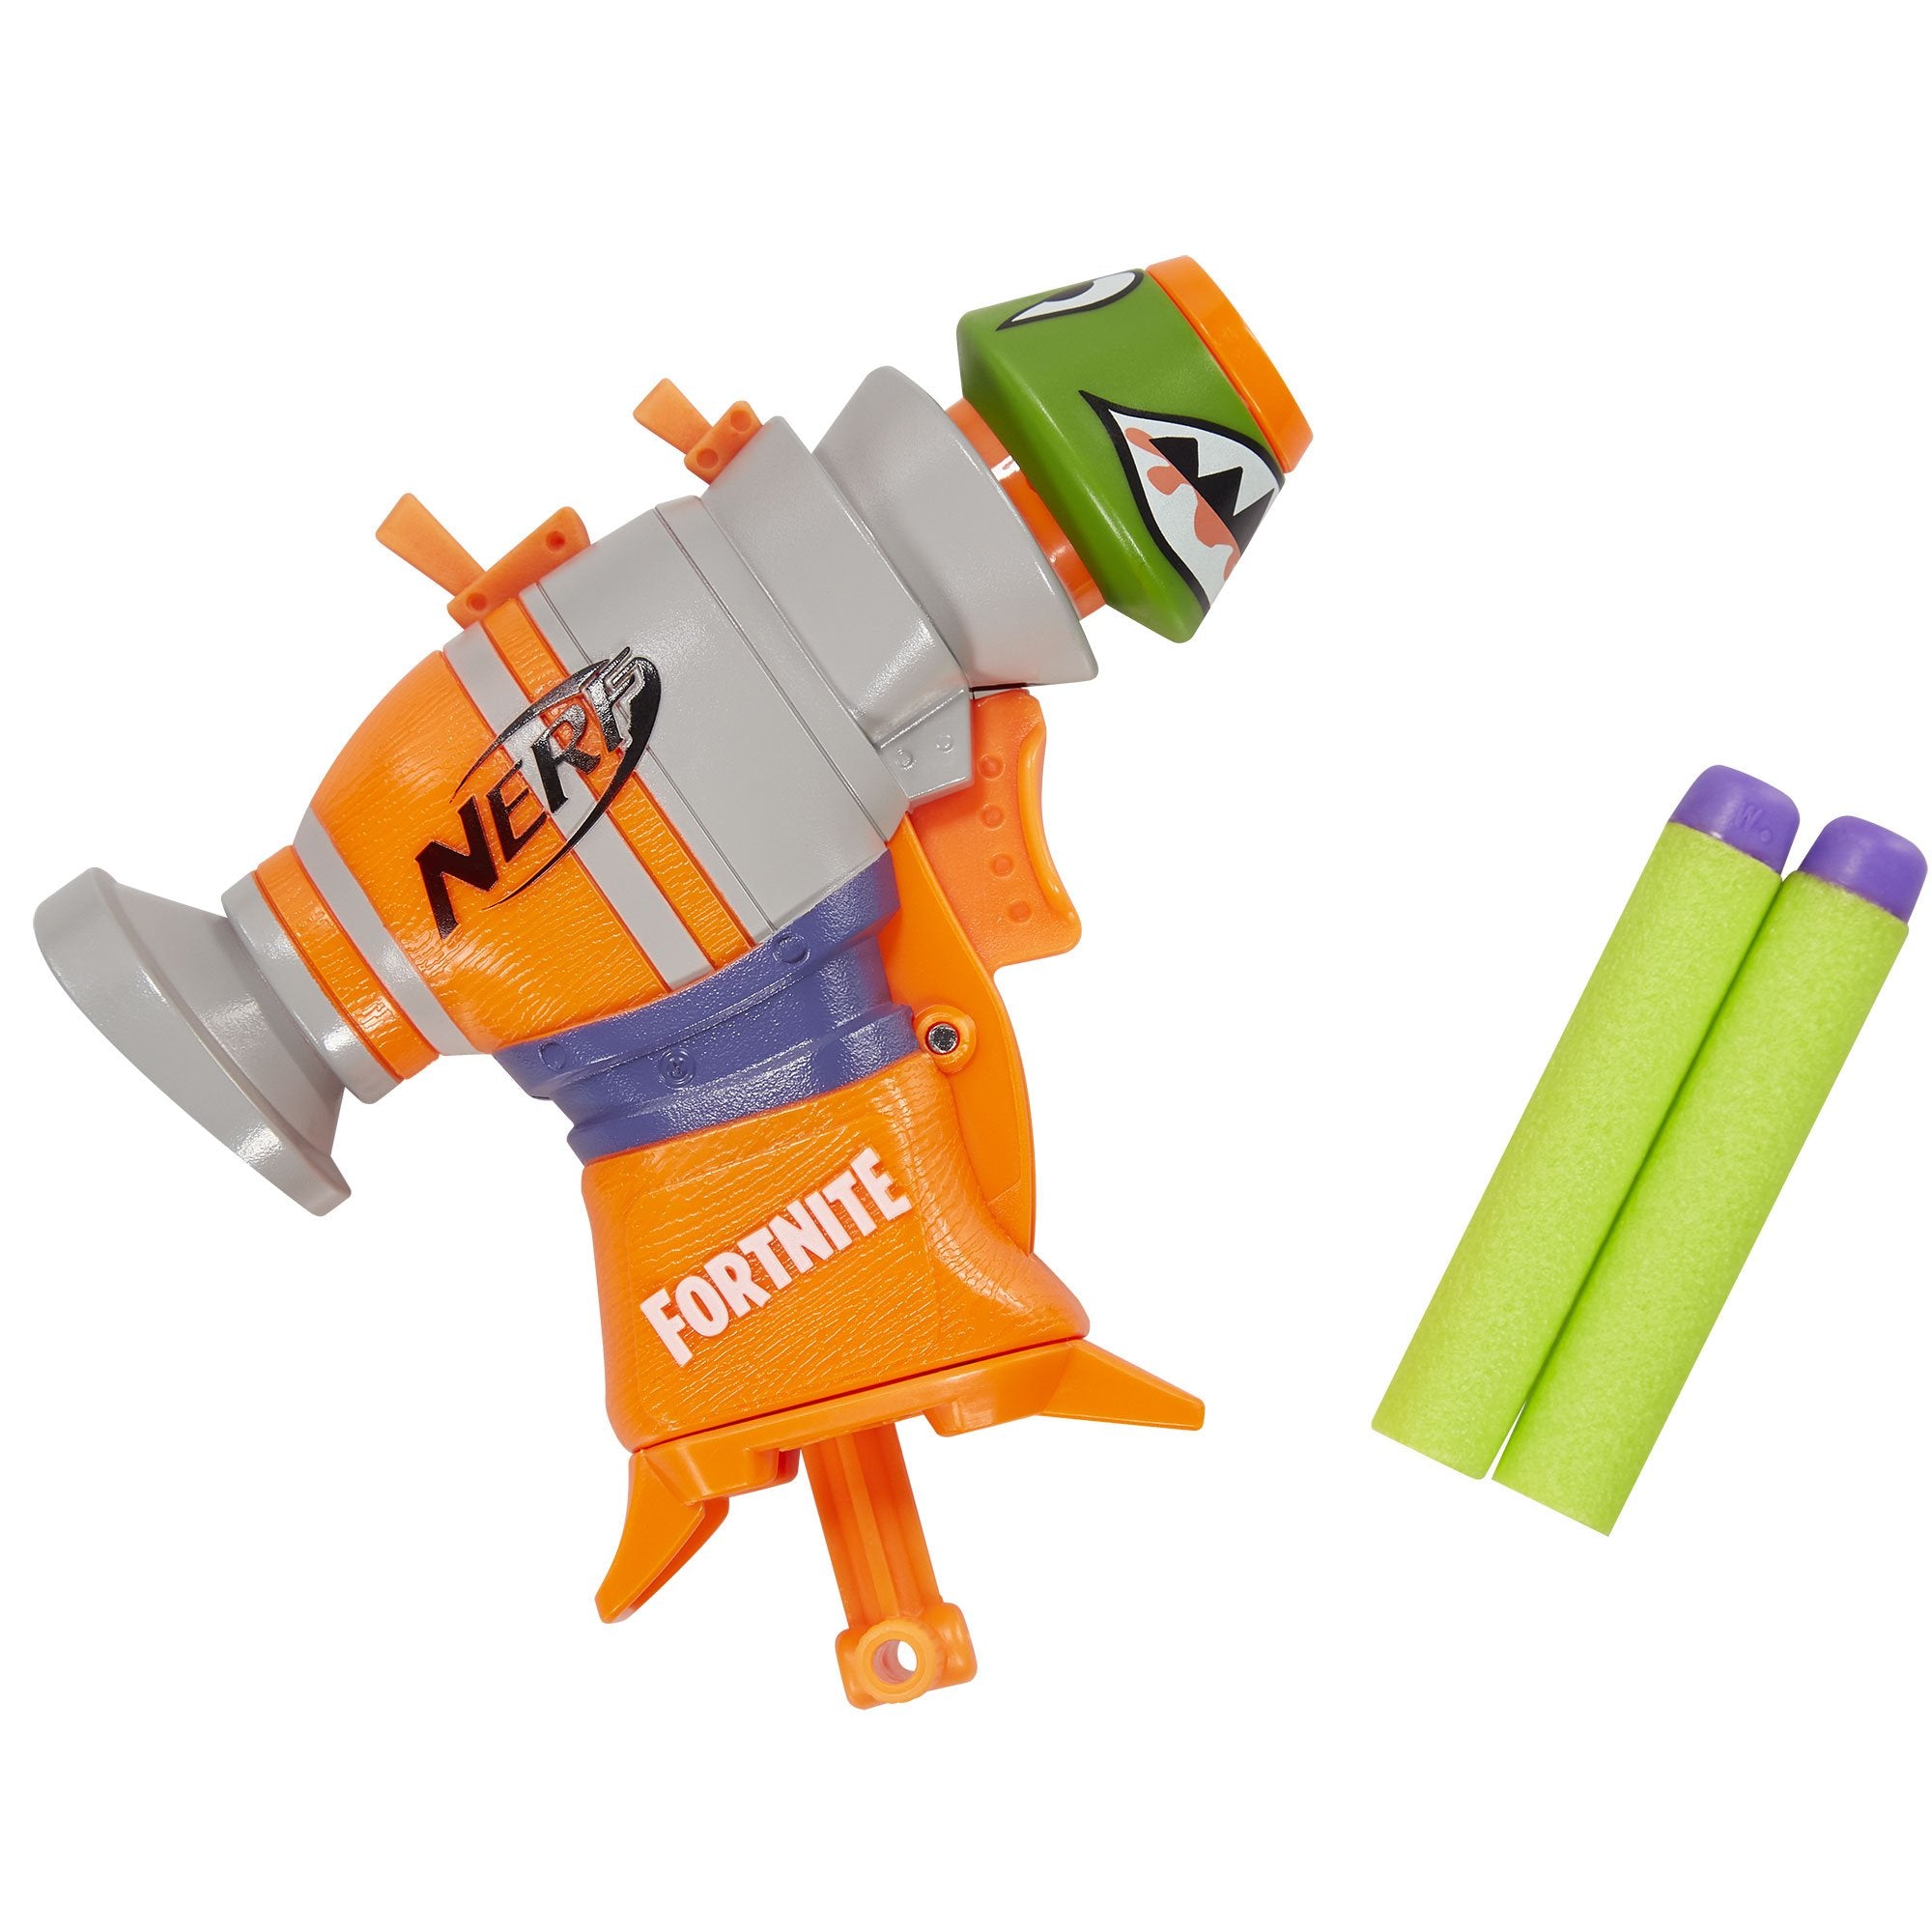 Nerf Fortnite Blasters And Super Soakers Are Available For Pre Order Fatherly